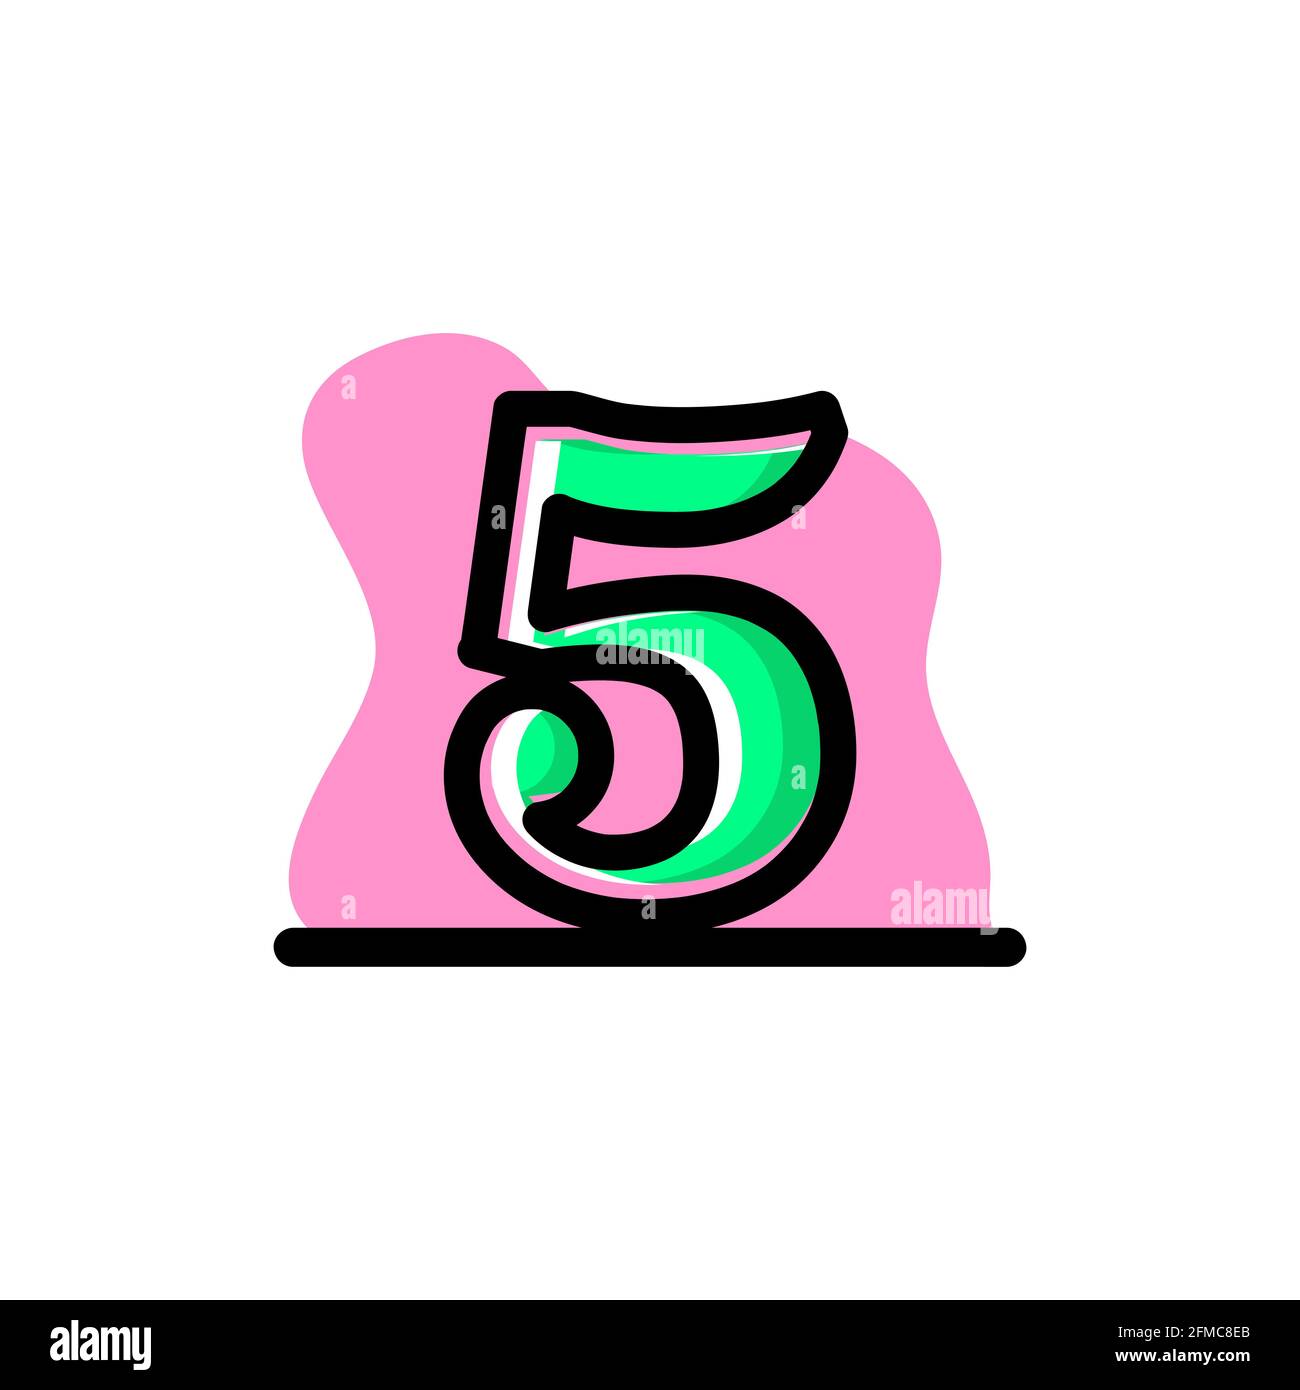 Number Five Icon. 5 Round Circle Digit Letter Count Down Counter